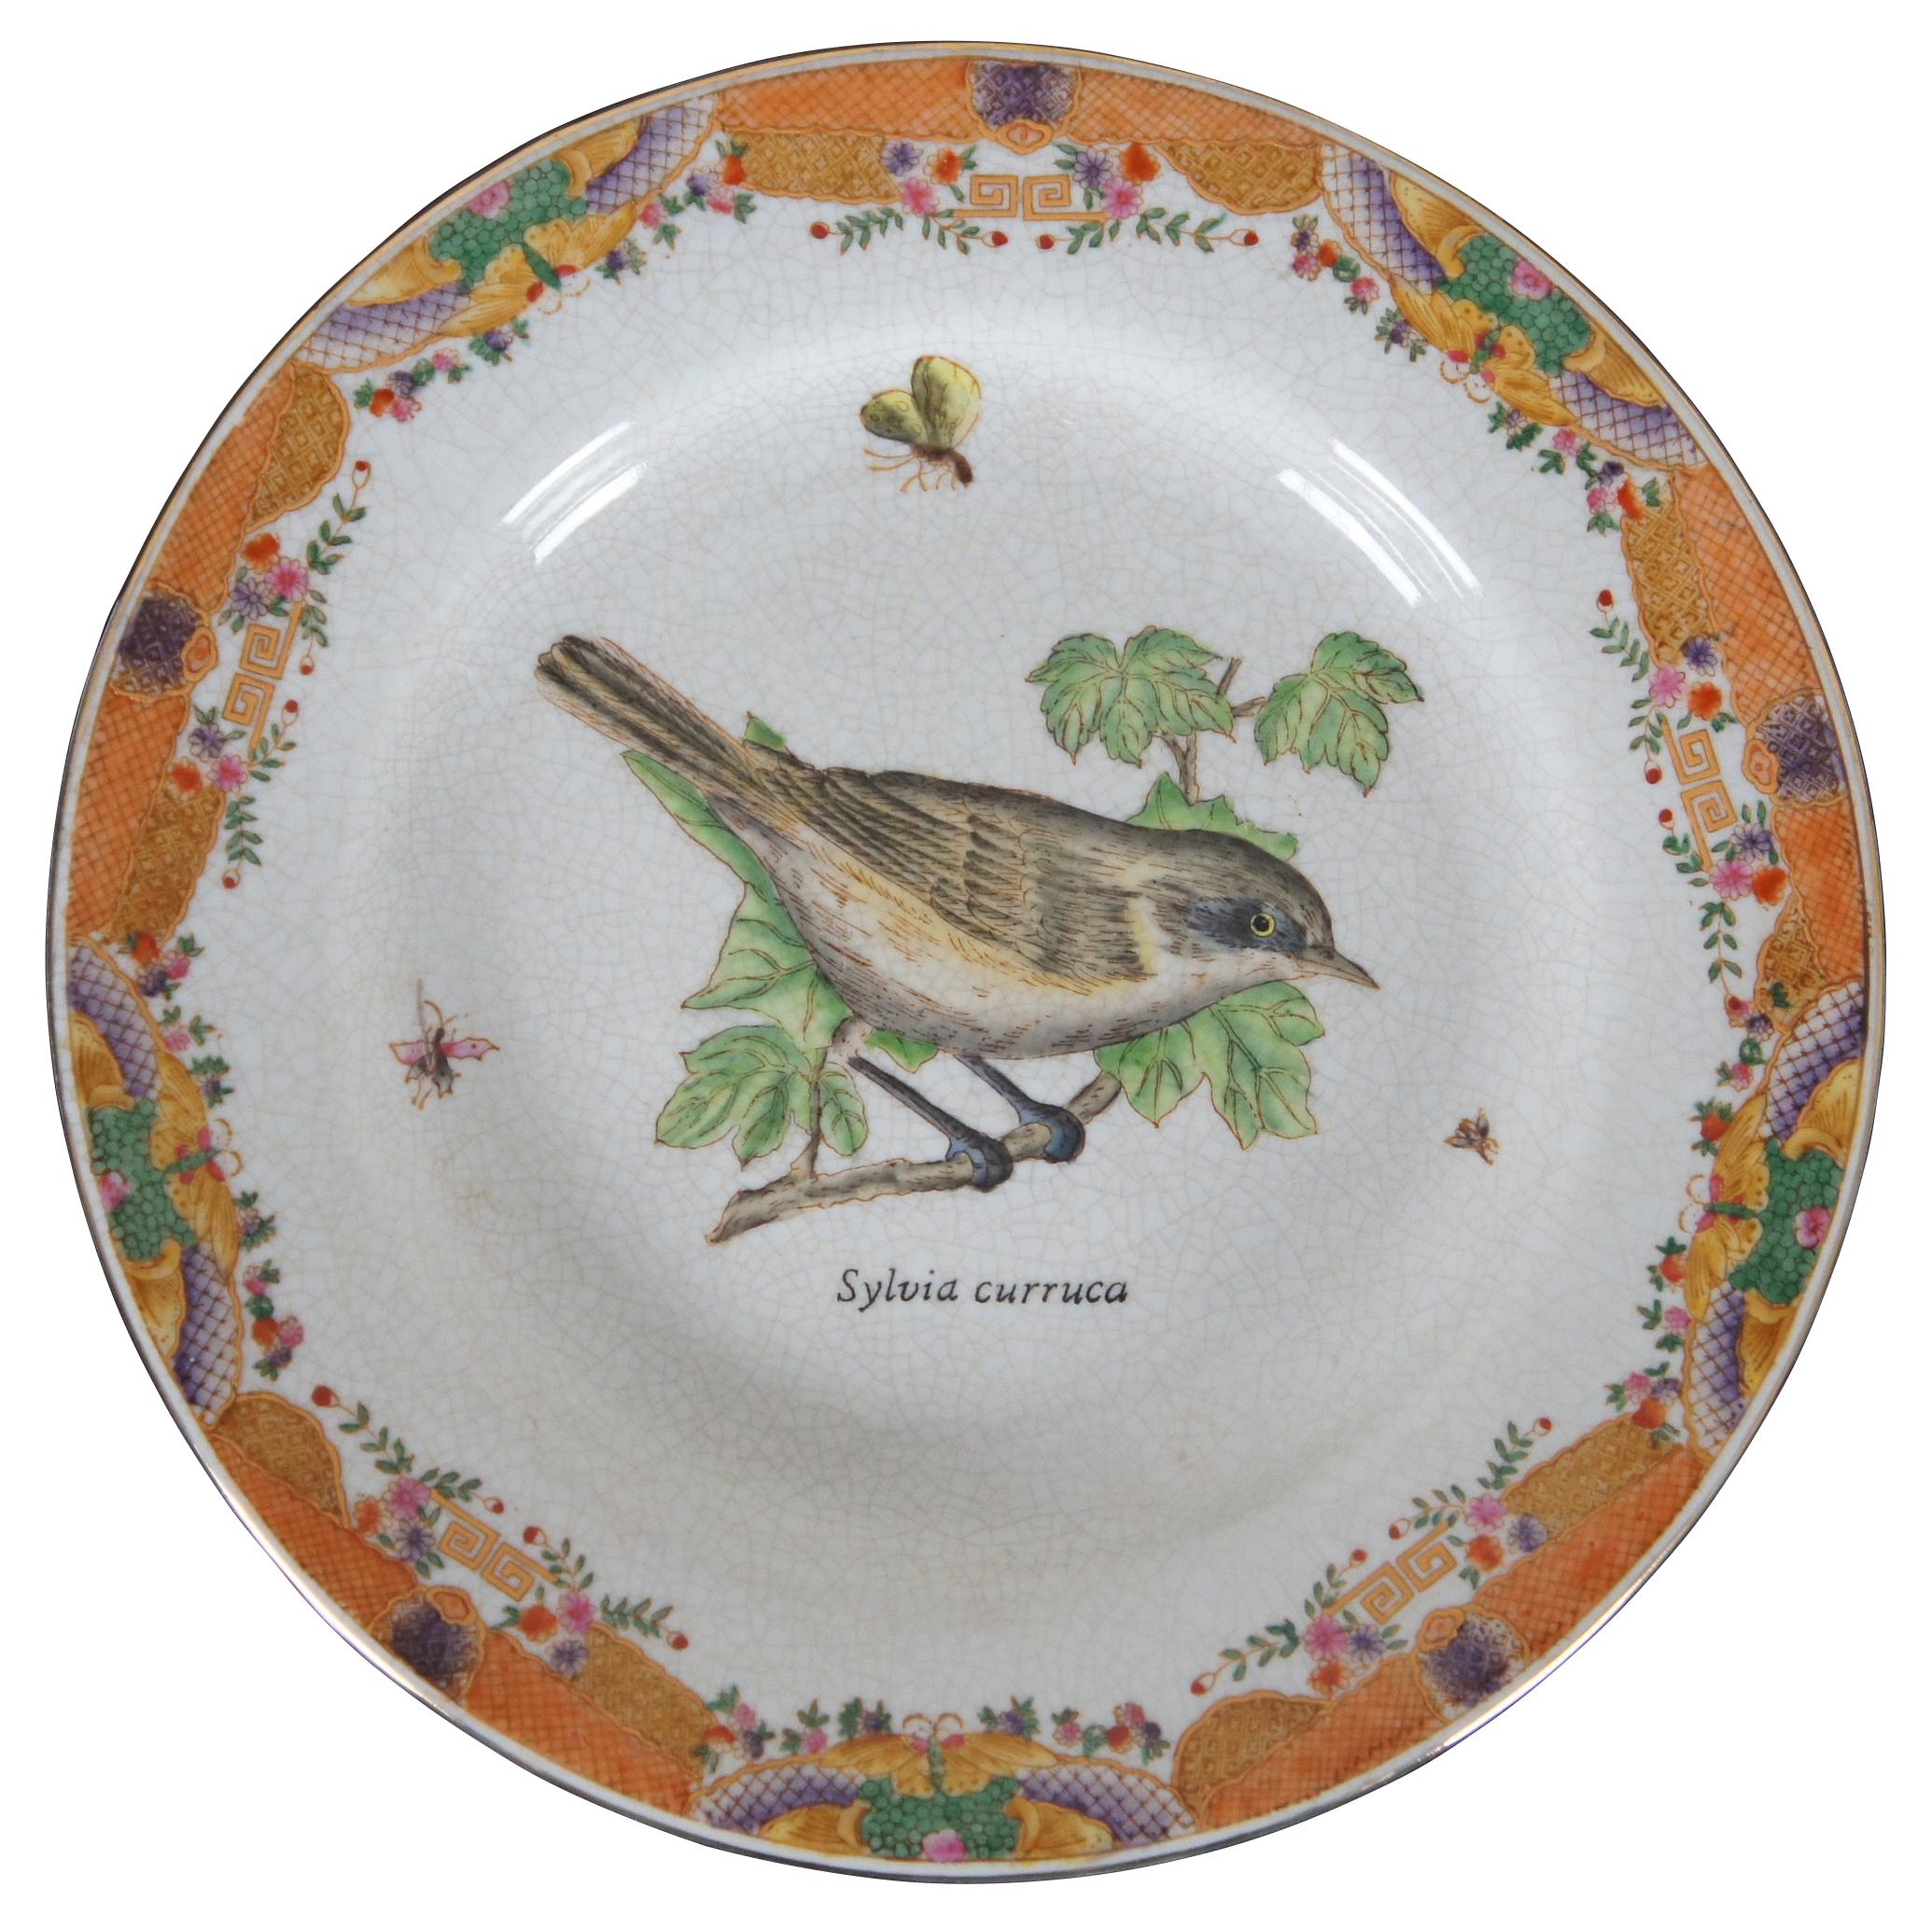 Set of eight decorative ceramic plates with different species of birds and their scientific names, in the style of Victorian illustrations, surrounded by an orange and purple Asian border and artificial crazing. “Wong Lee International Company of